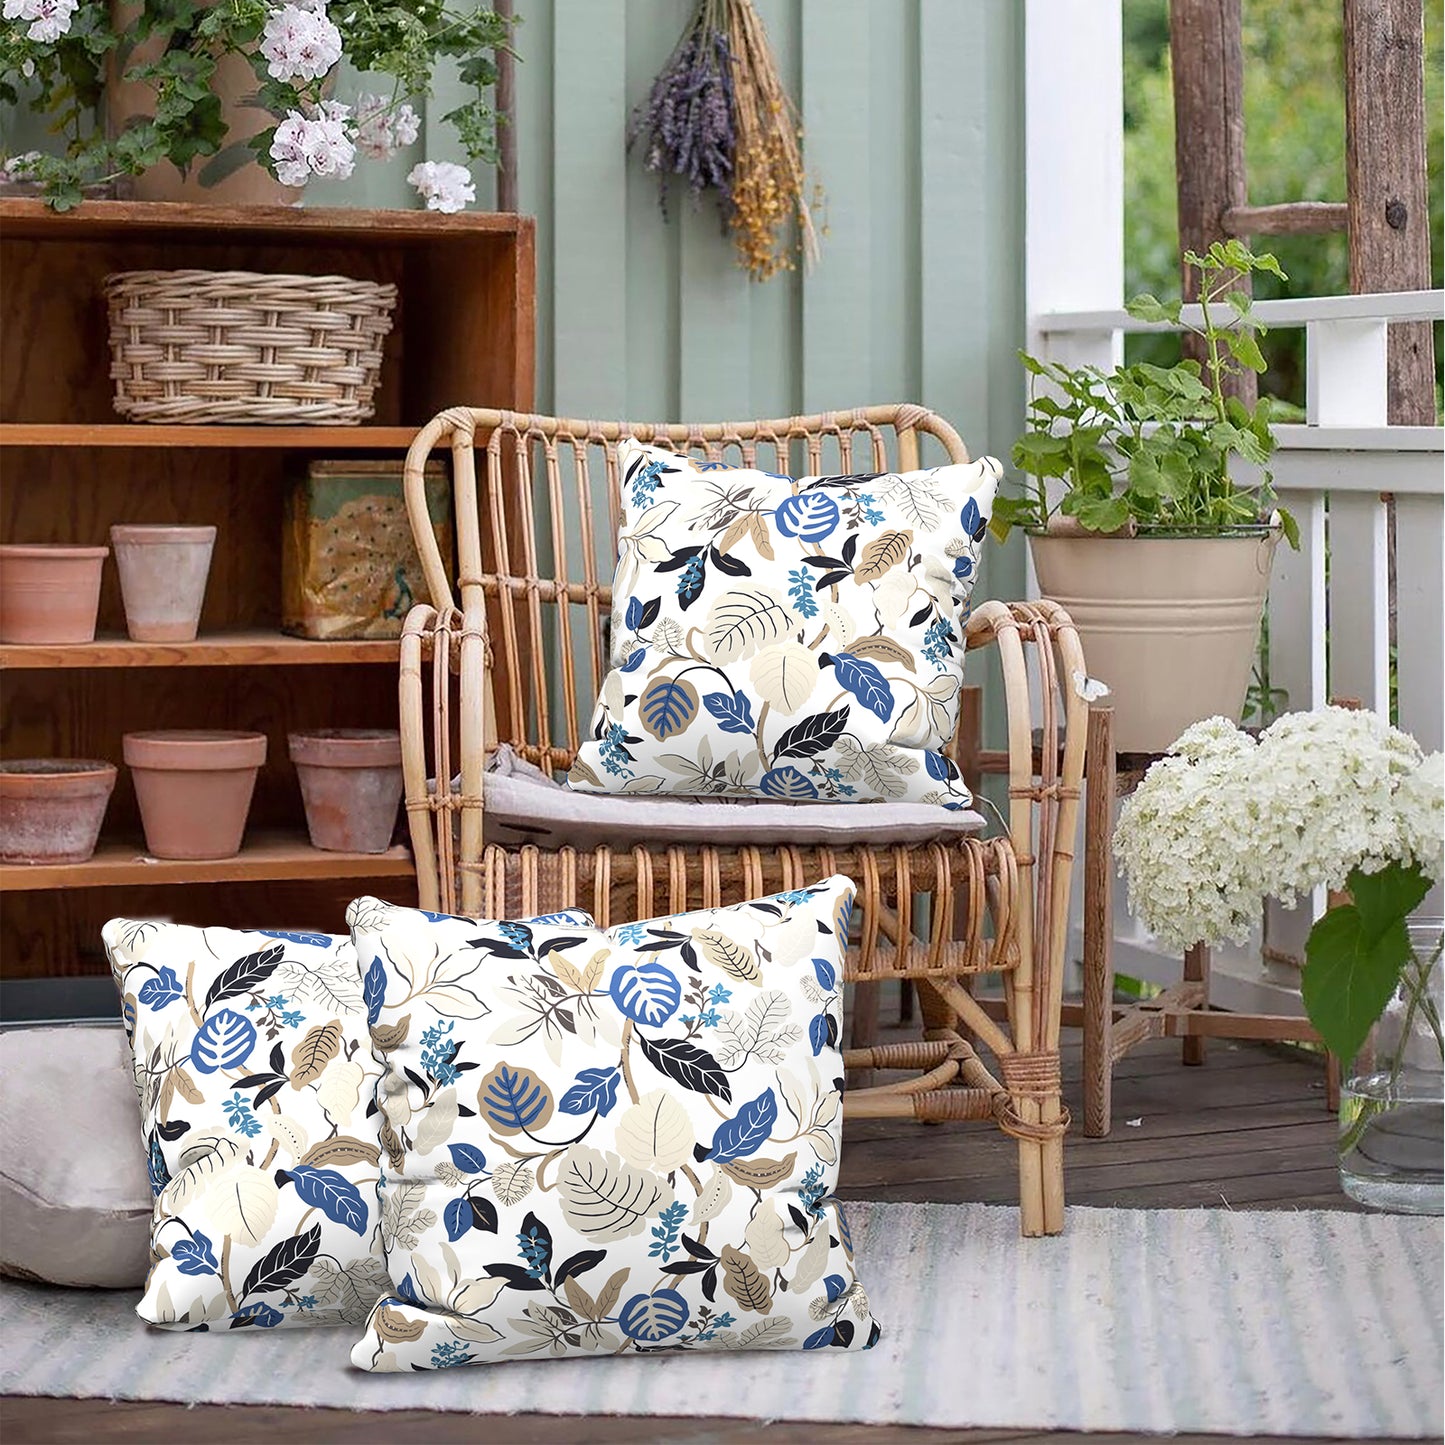 Melody Elephant Outdoor Throw Pillows 16x16 Inch, water Repellent patio pillows with Inners set of 2, outdoor pillows for patio furniture home garden, Breeze Leaves Beige